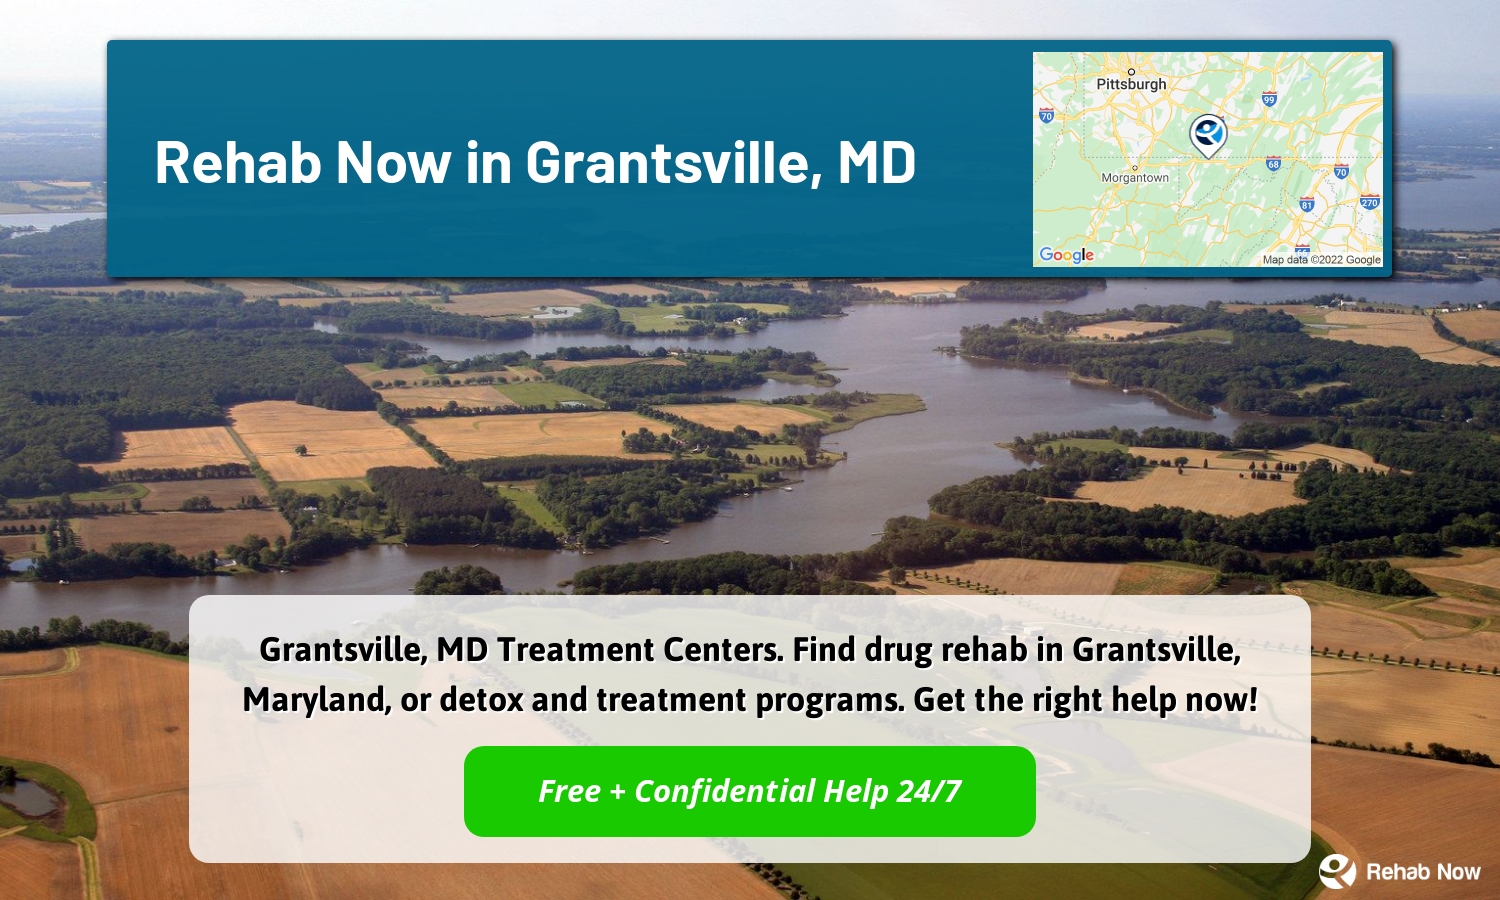 Grantsville, MD Treatment Centers. Find drug rehab in Grantsville, Maryland, or detox and treatment programs. Get the right help now!